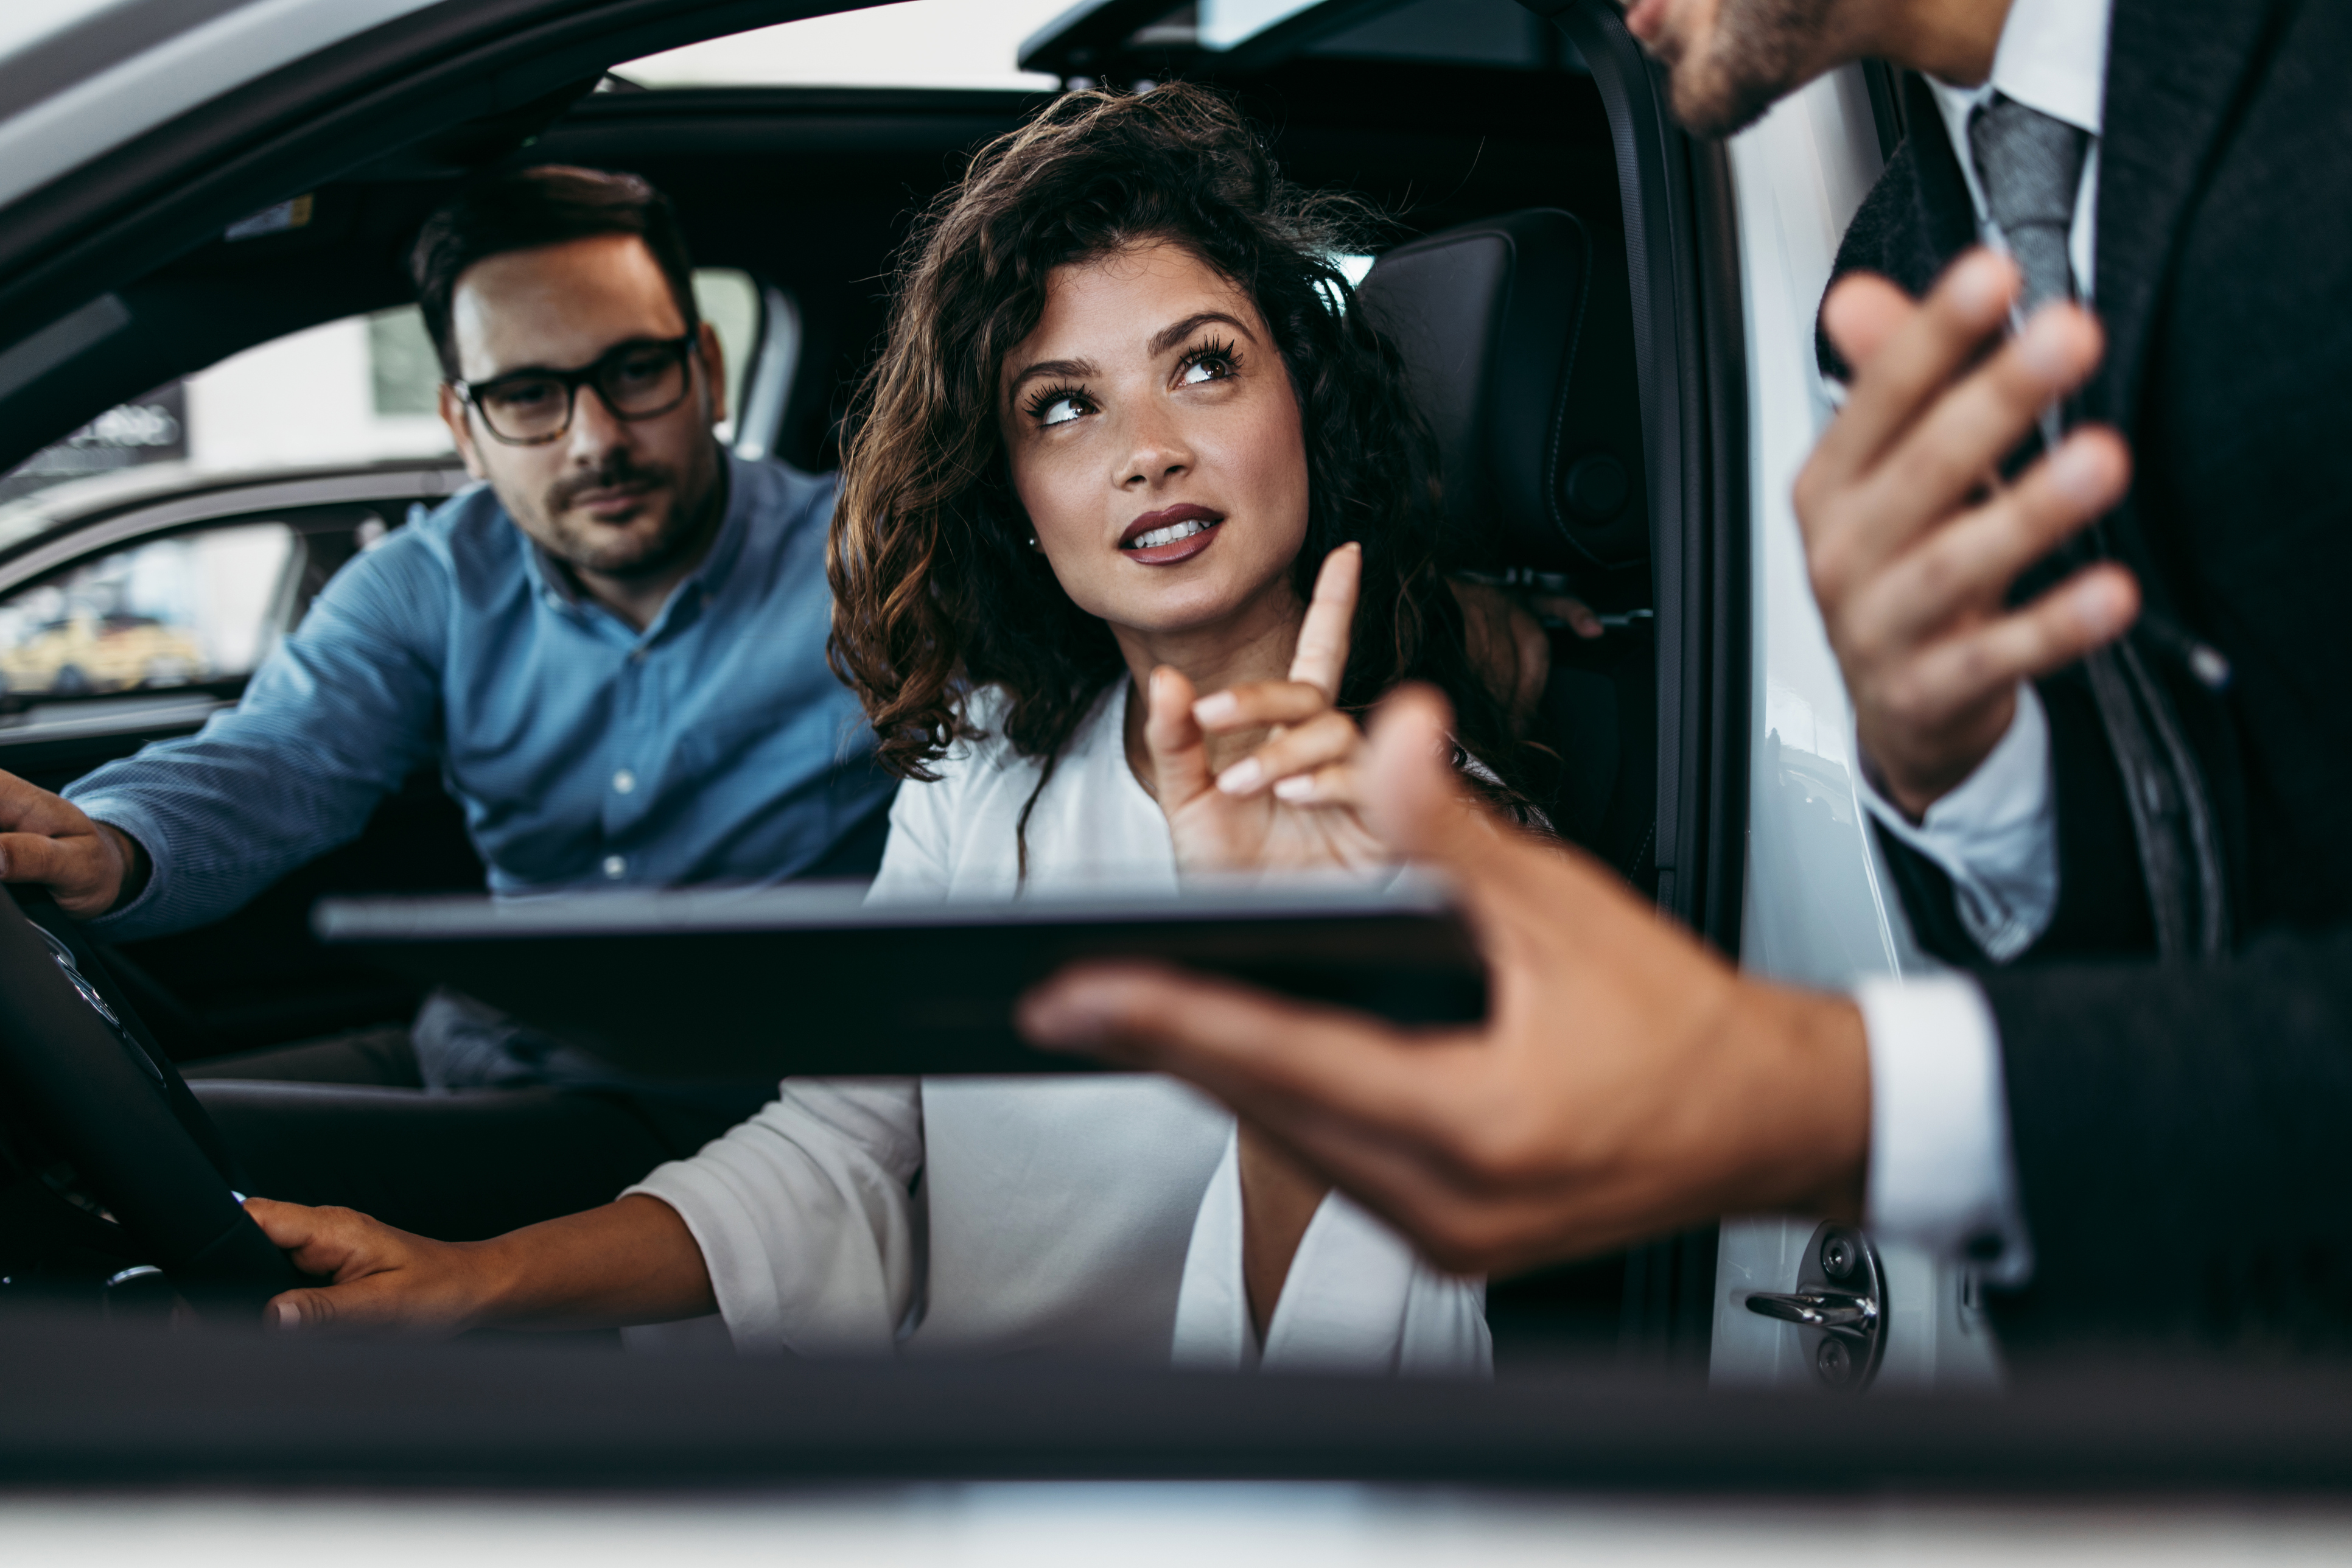 The Benefits of Getting Preapproved for a Car Loan